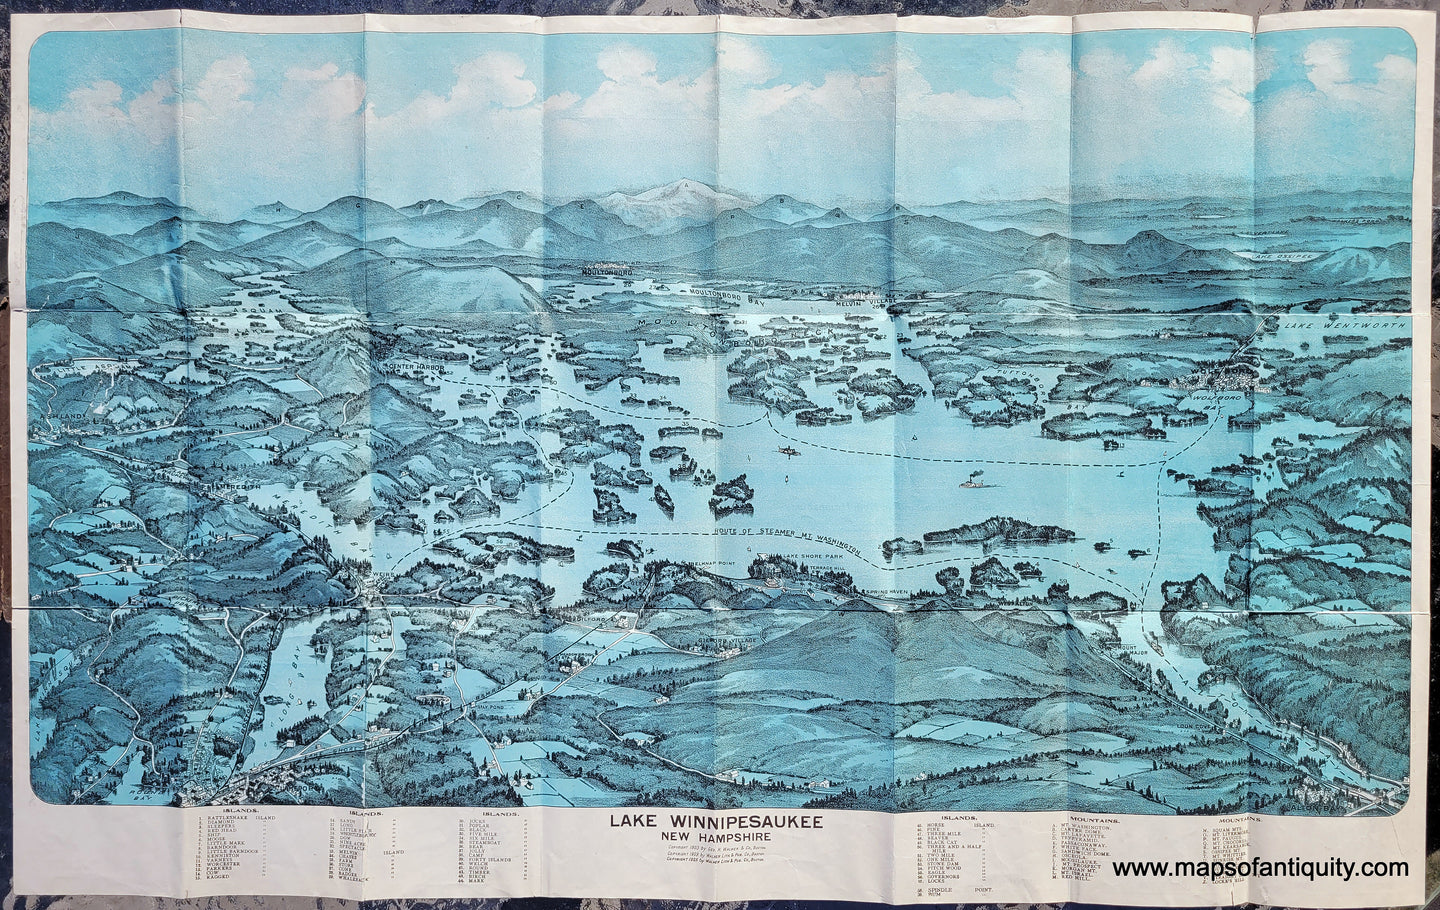 Antique Bird's-eye view map of lake Winnipesaukee in New Hampshire with the White Mountains in the distance. Chromolithograph with blue coloring.